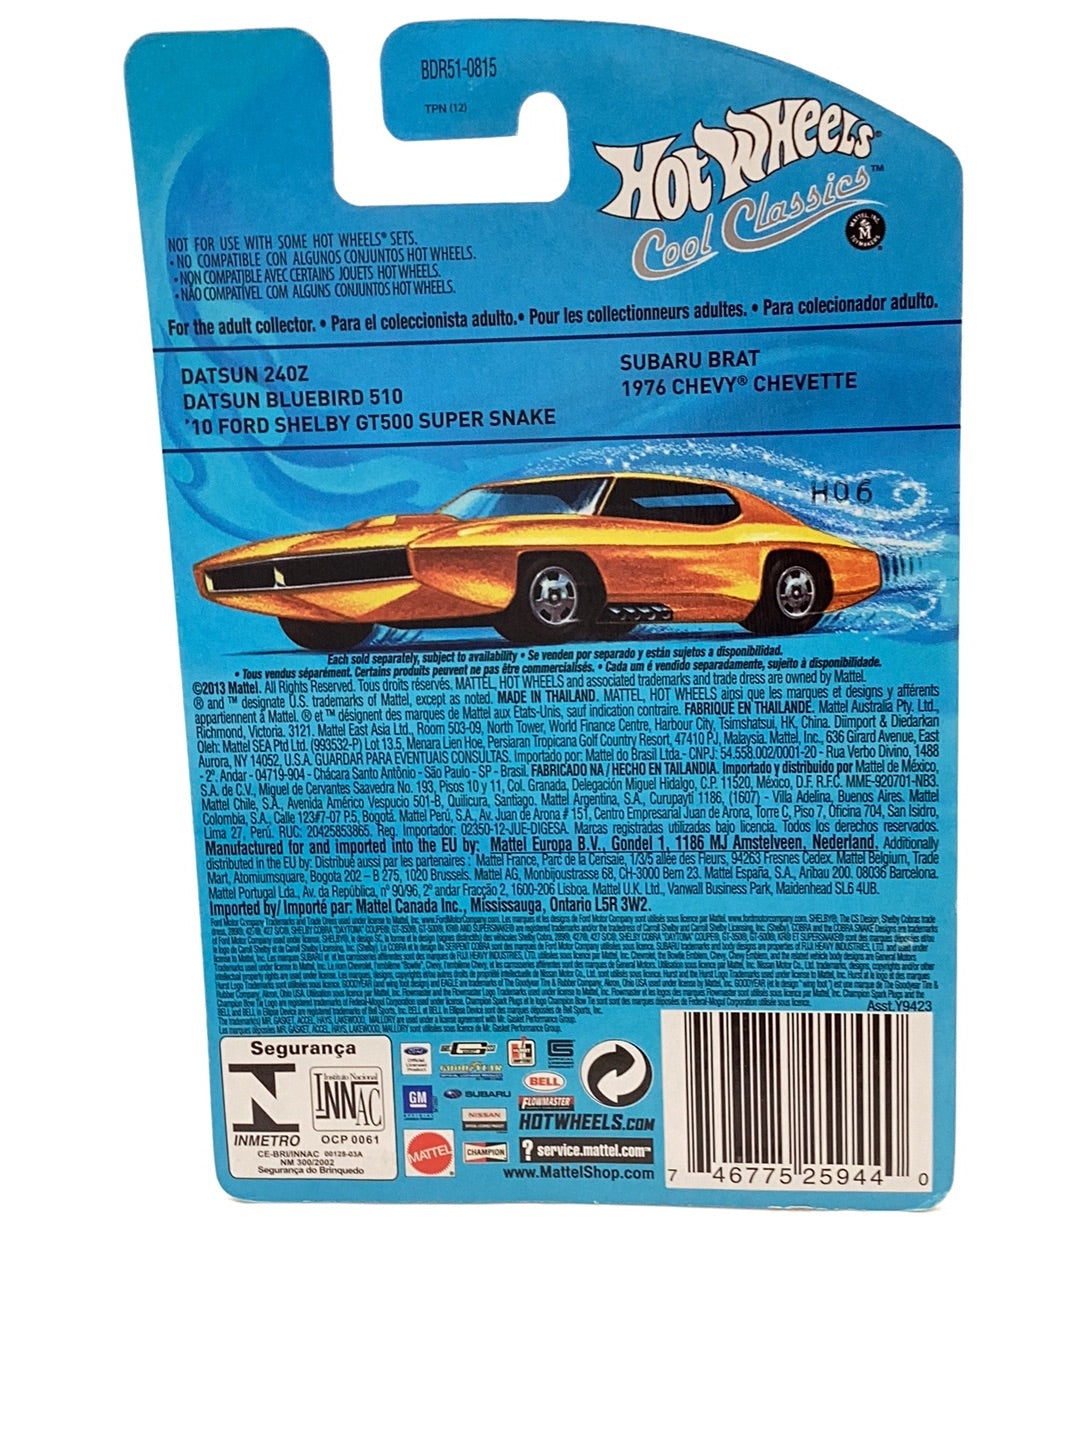 Hot wheels cool classics 10 Ford Shelby GT500 Super snake 30/30